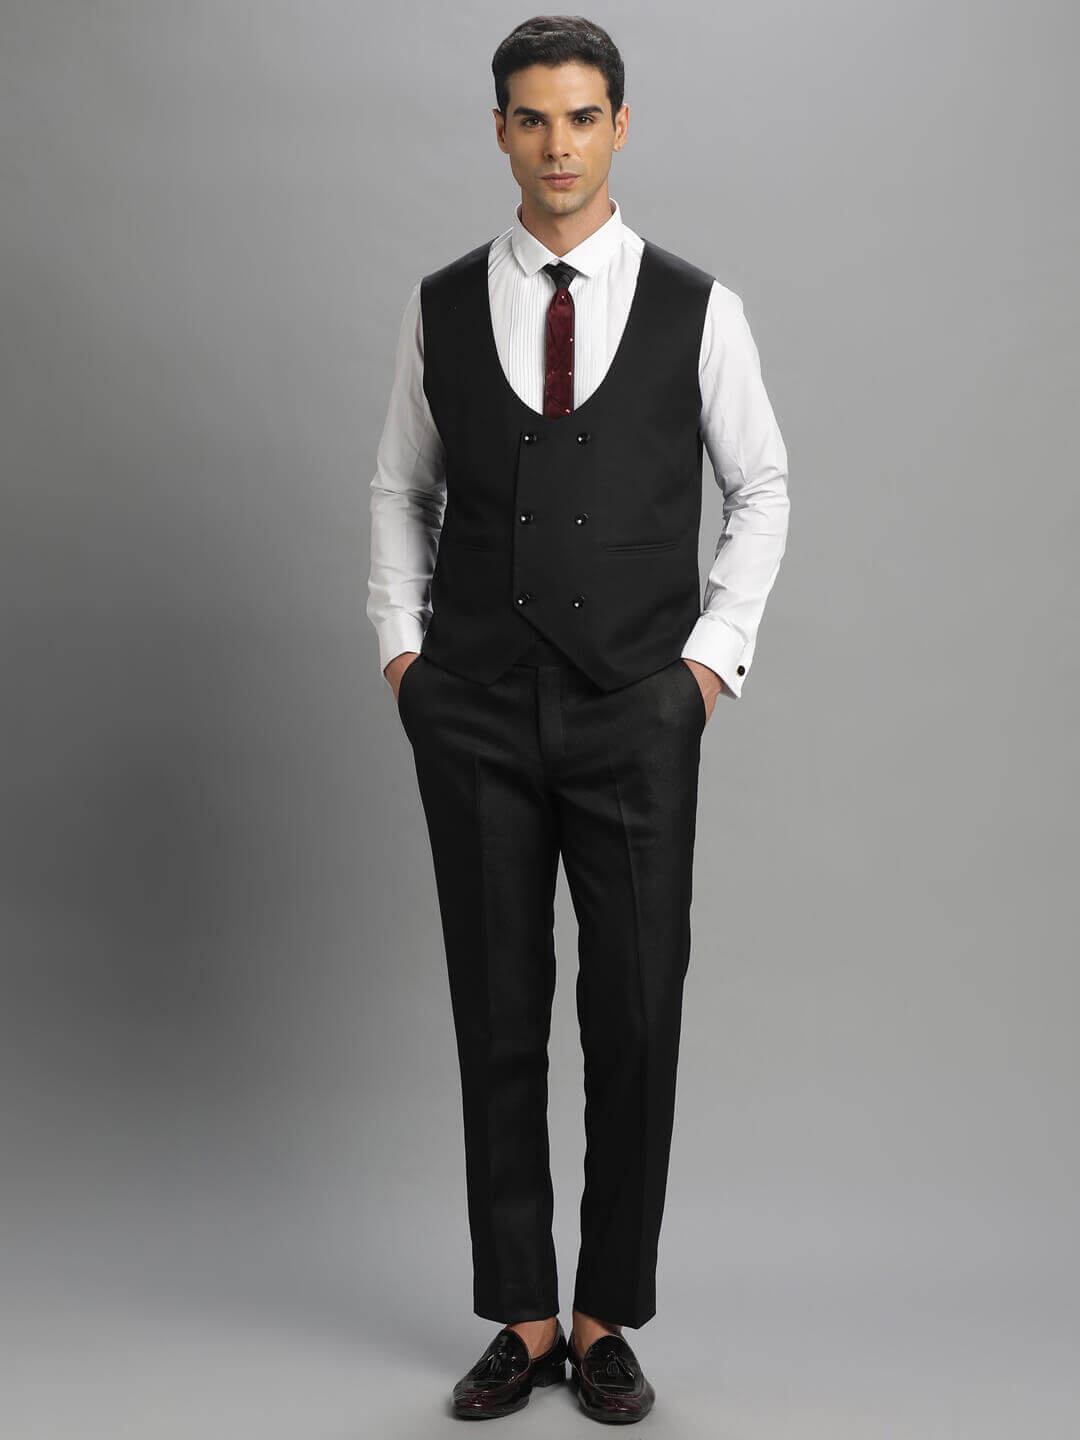 Tuxedo 3 Piece Suit For Men in Egra at best price by Golden Leaf - Justdial